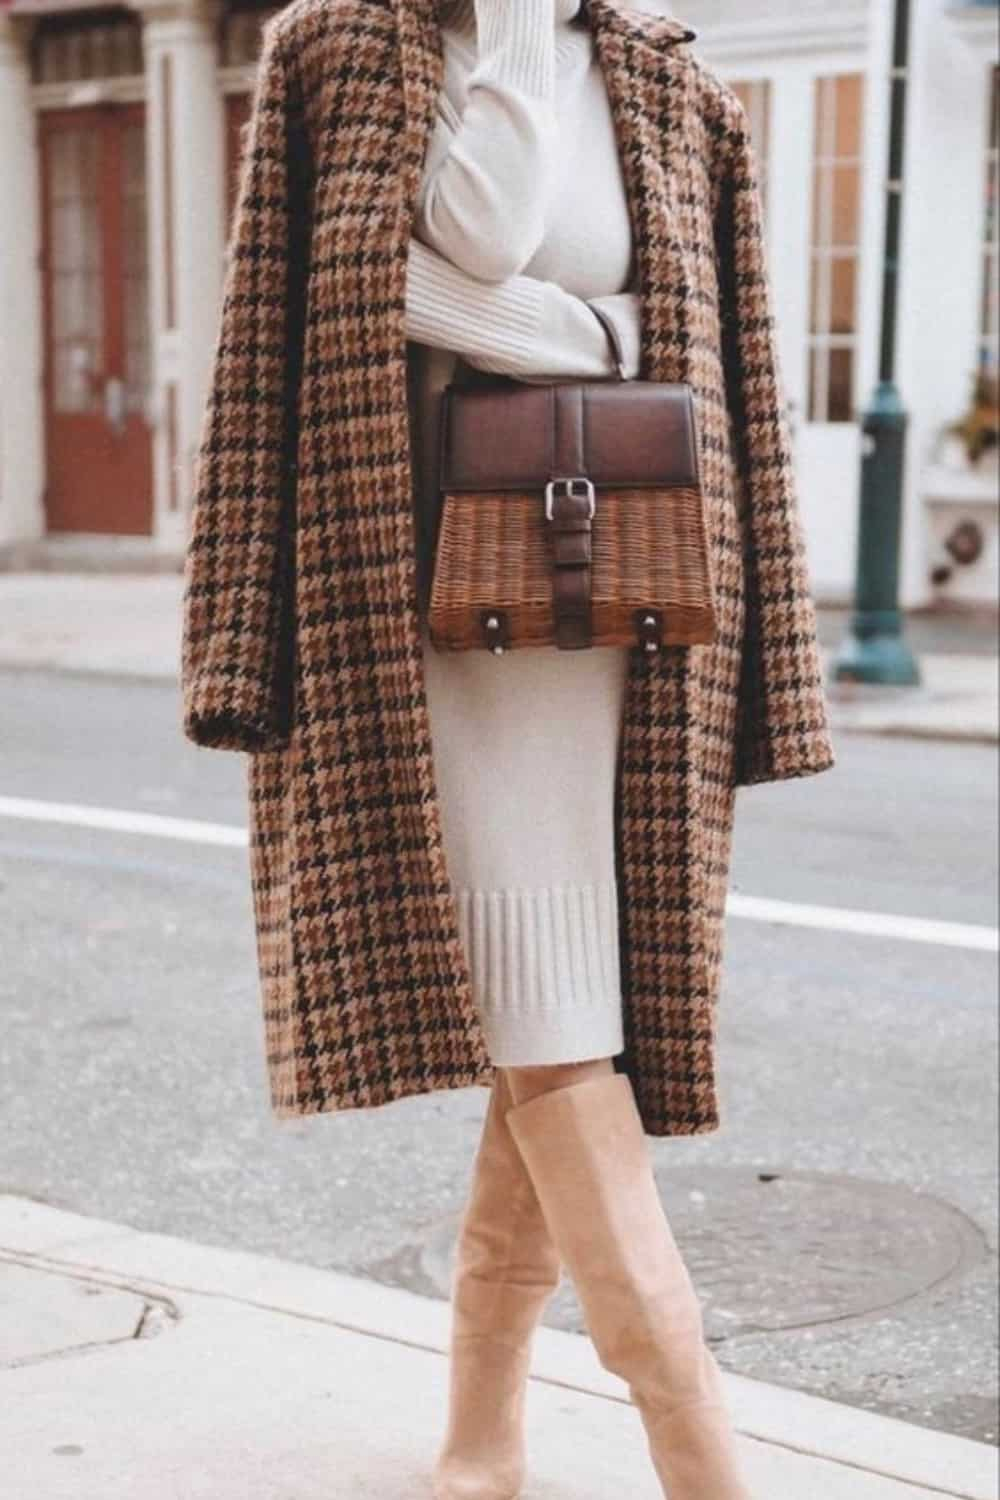 Plaid Coat Outfit With White Sweater dress and Nice Tall Boots